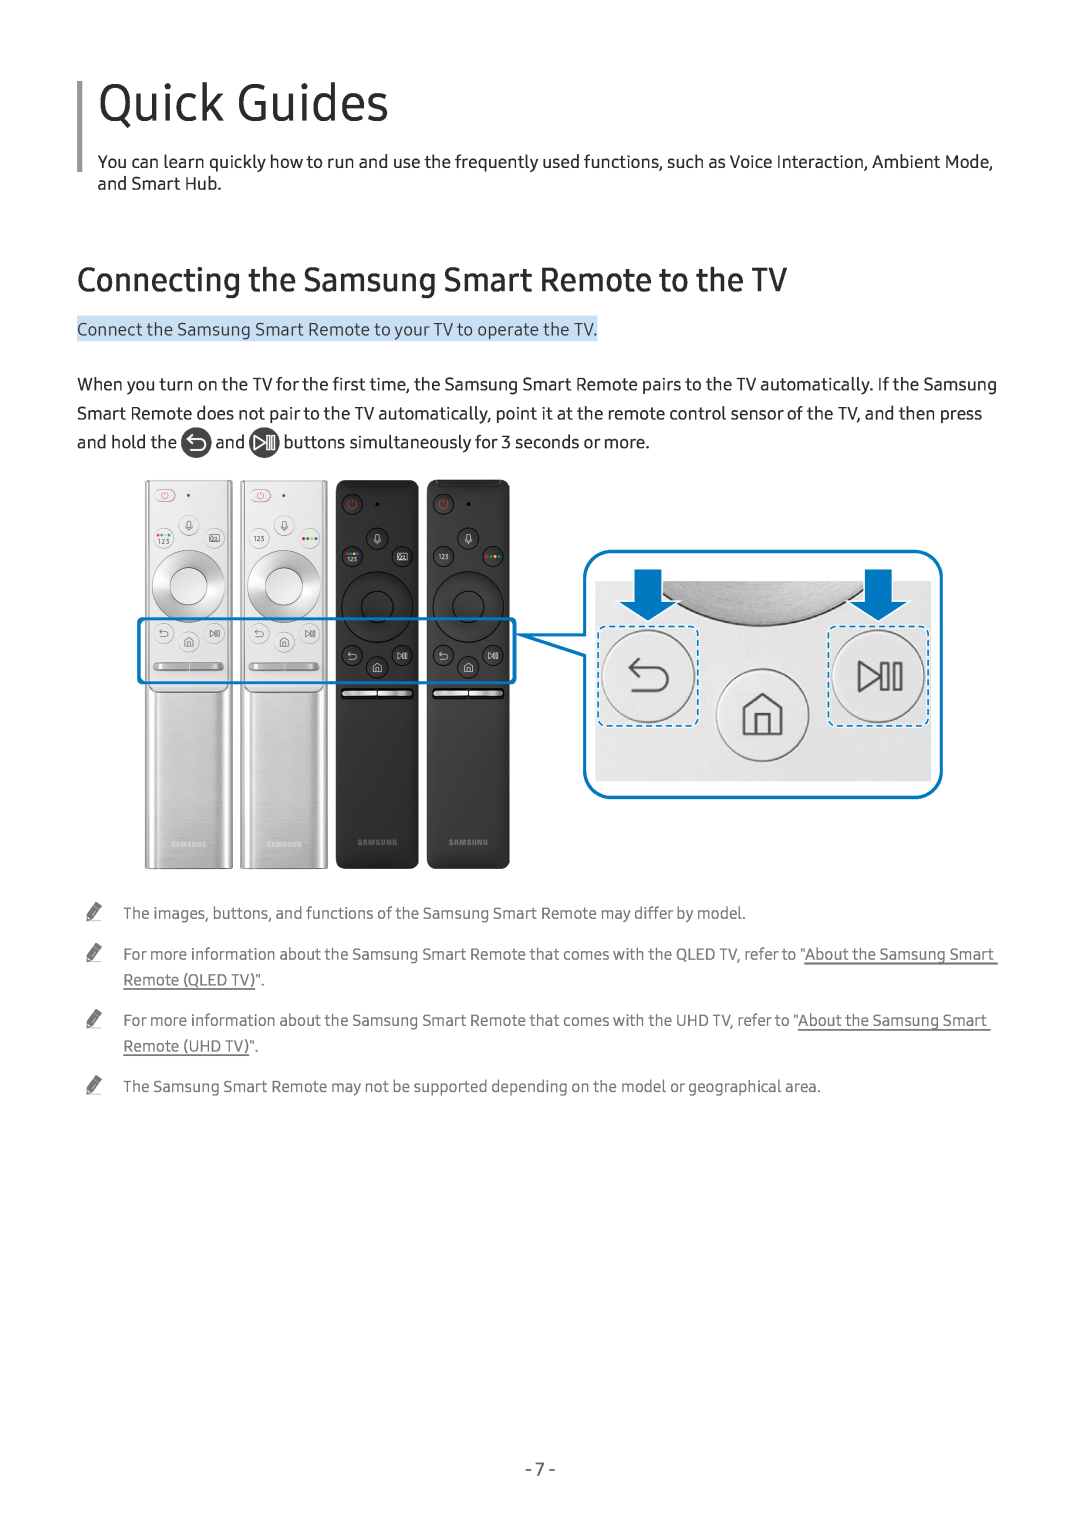 Samsung UE65NU8059TXZG, UE82NU8009TXZG, UE65NU8509TXZG manual Quick Guides, Connecting the Samsung Smart Remote to the TV 